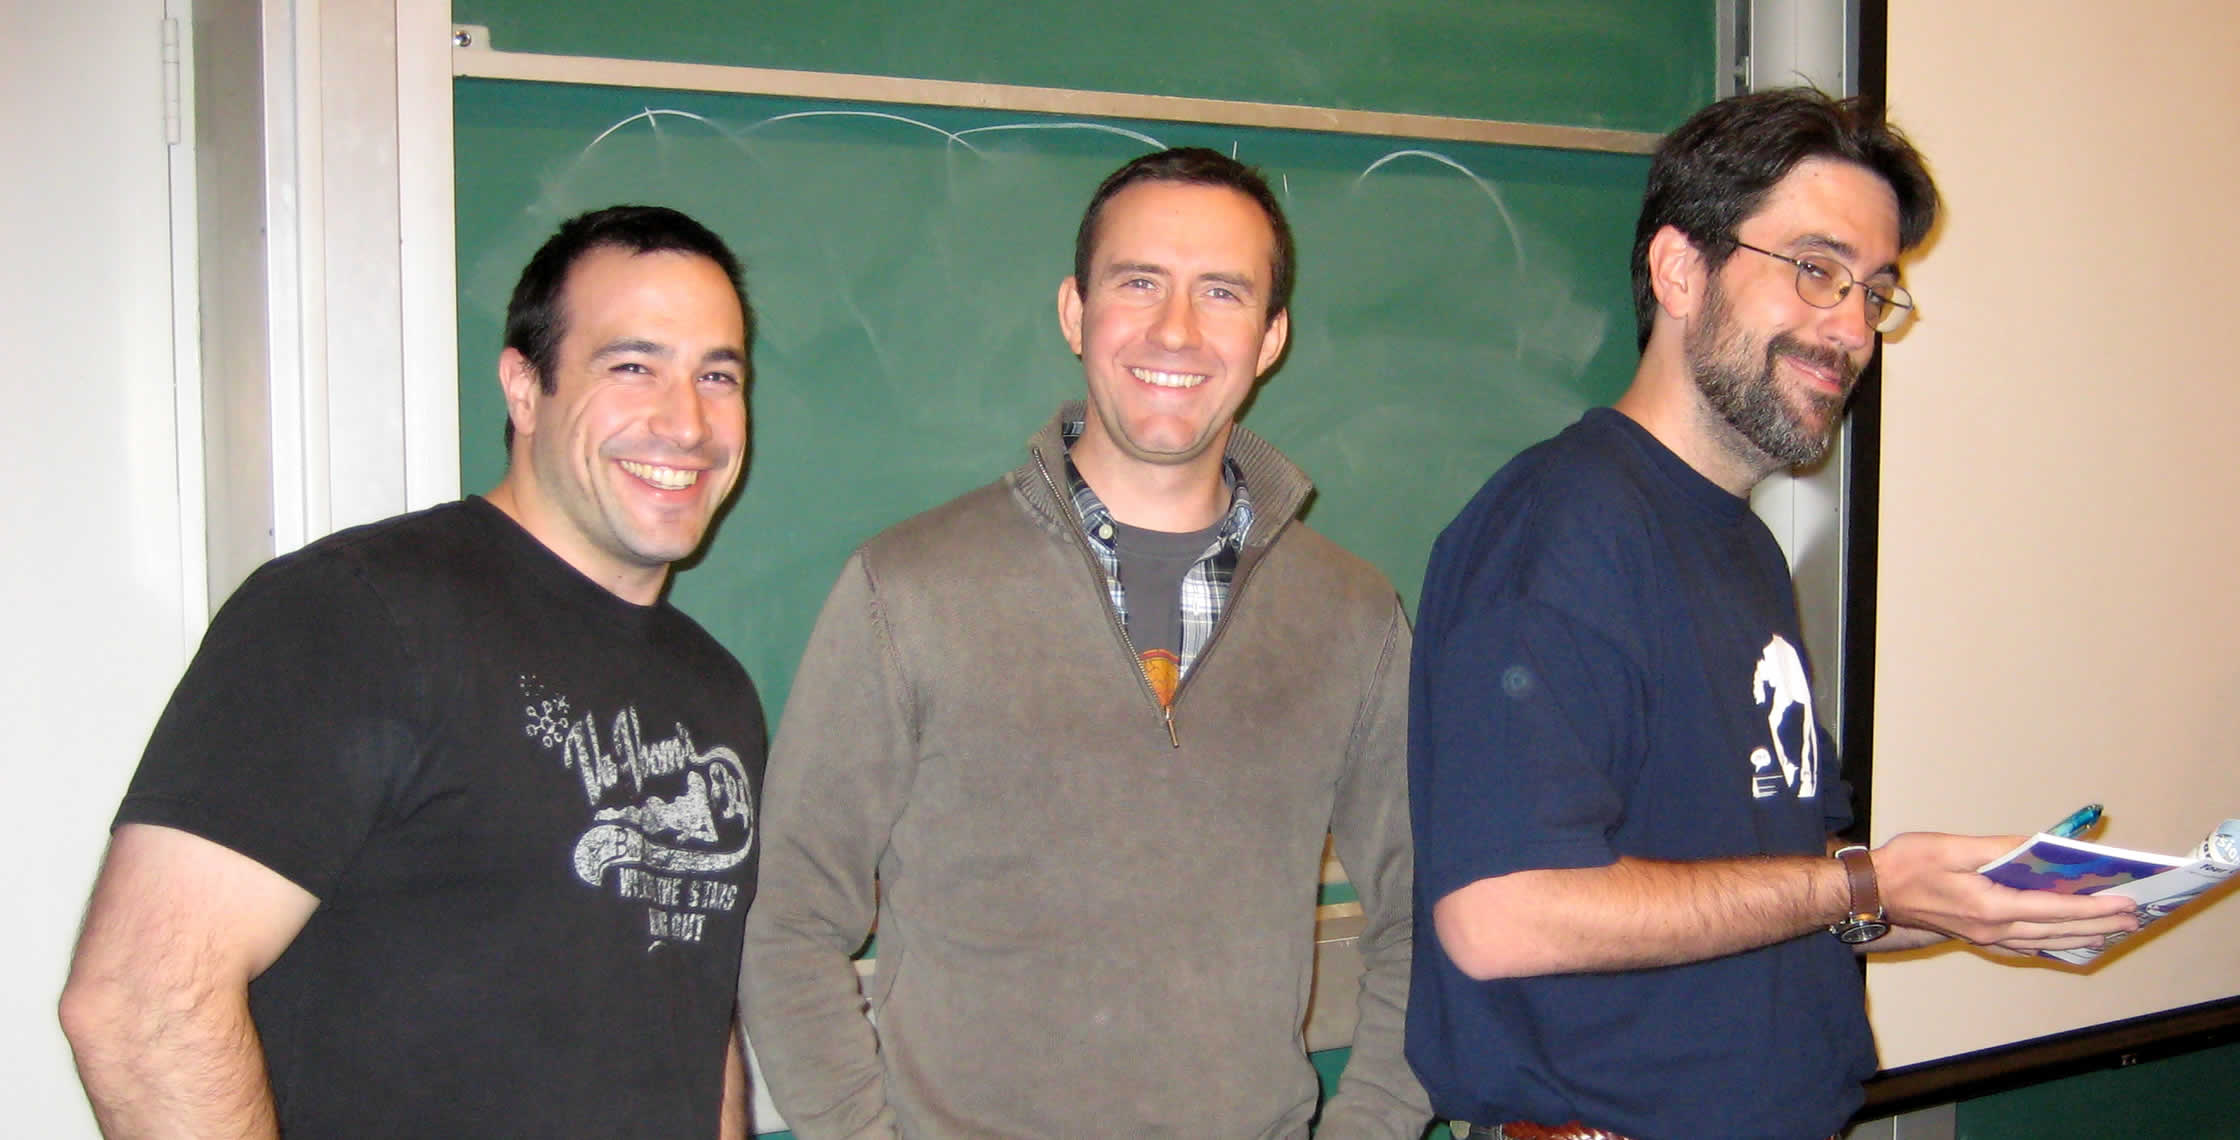 Ben Nadel at the New York ColdFusion User Group (Feb. 2008) with: Peter Bell and Ray Camden